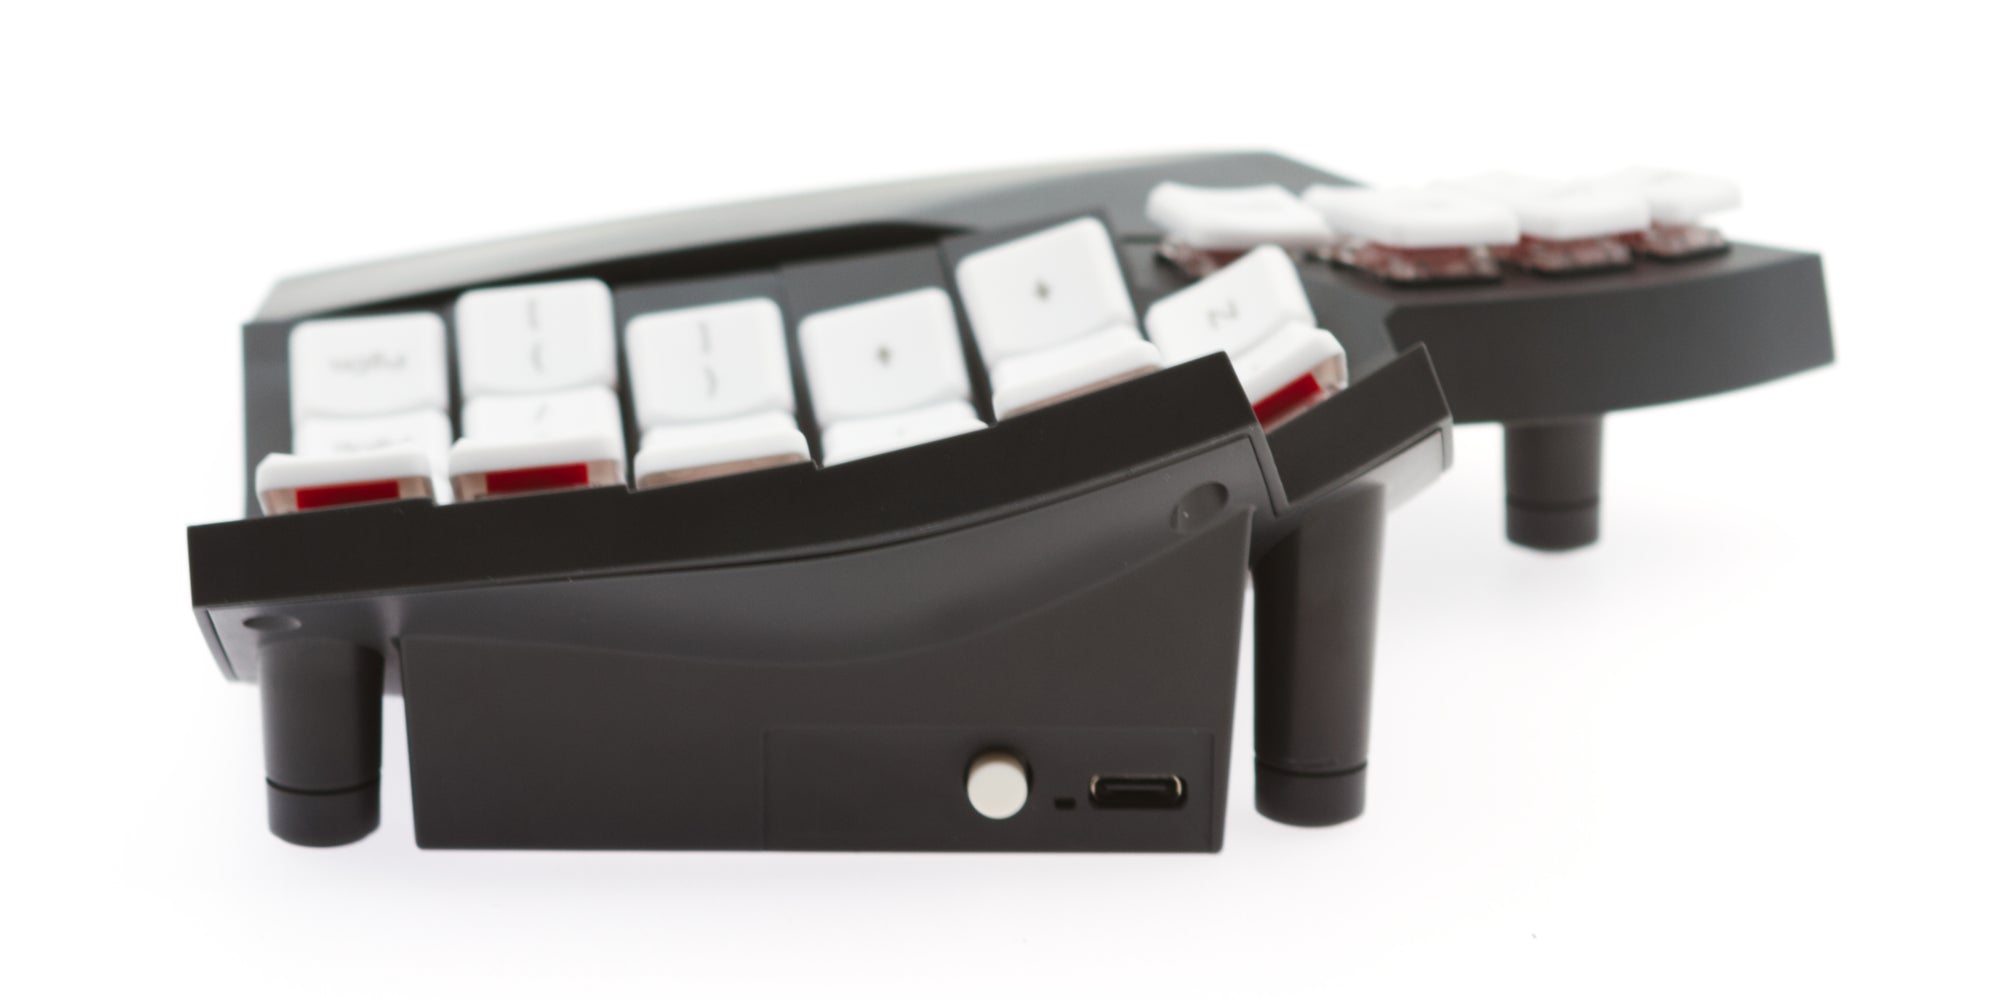 Side profile view of the Glove80 keyboard showing its low-profile height